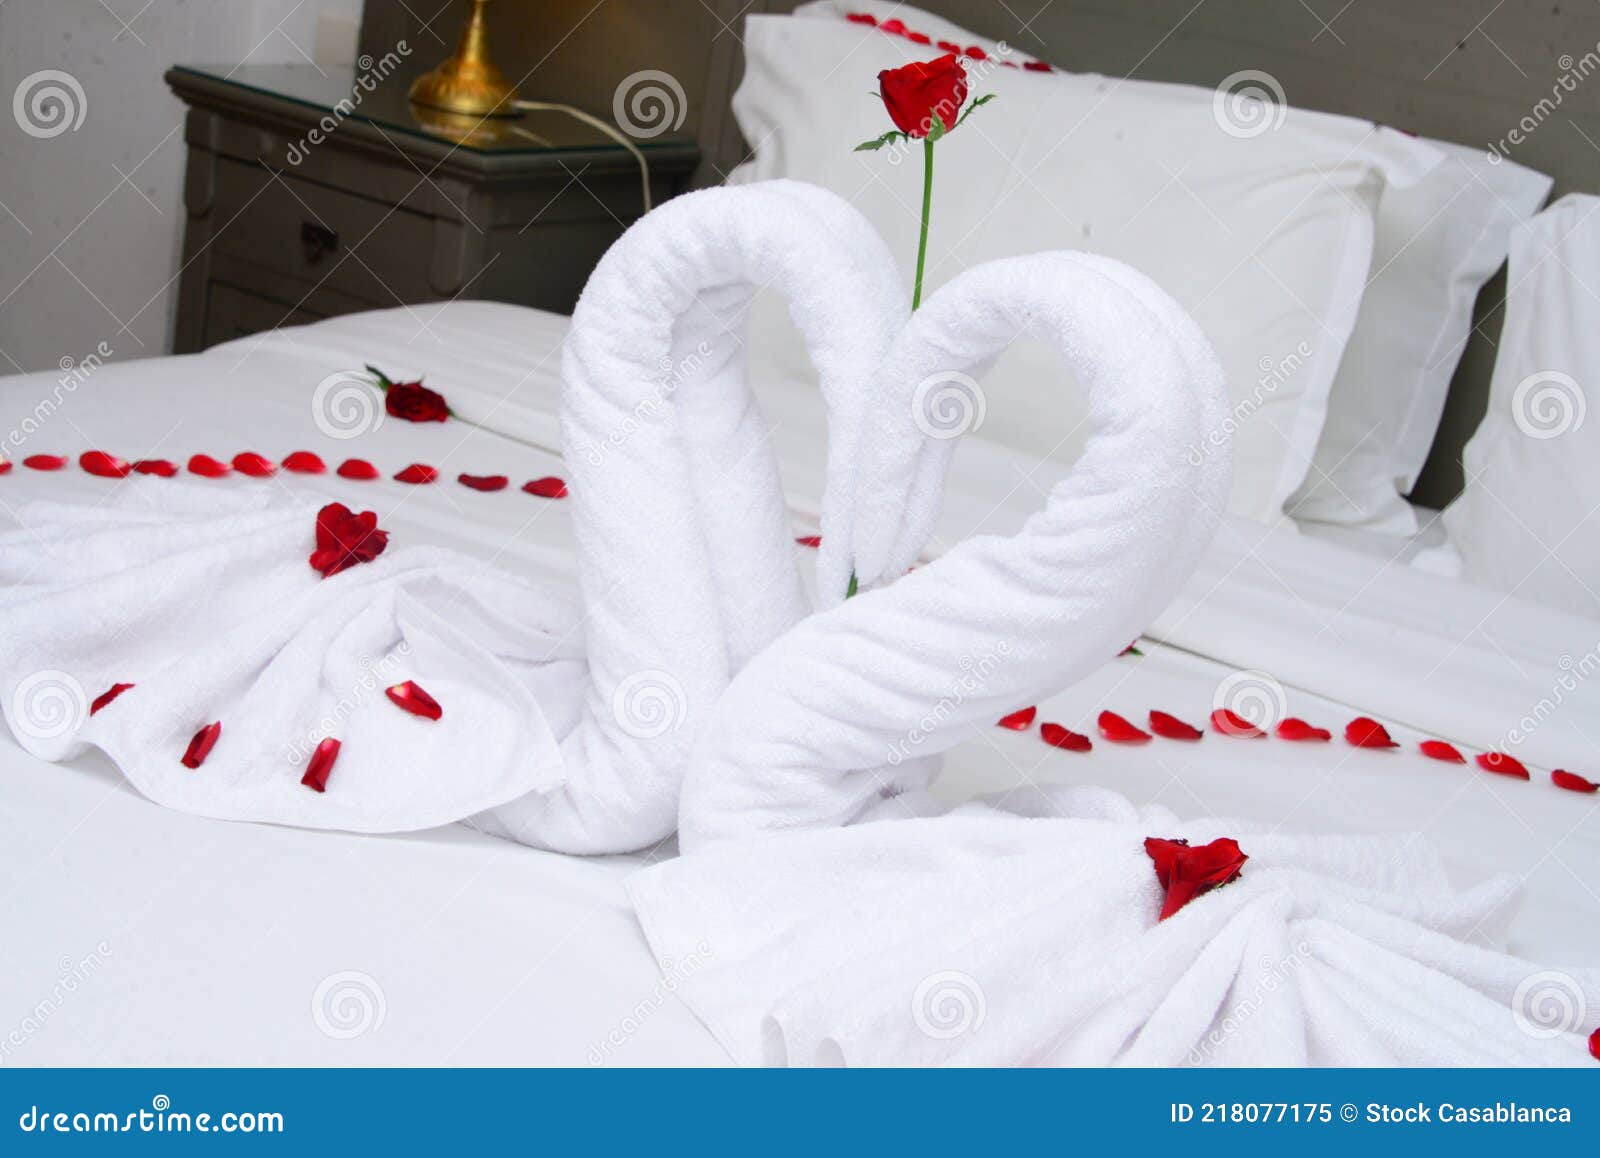 Towel As Birds Decoration with Red Rose Petals on White Clean Bed ...